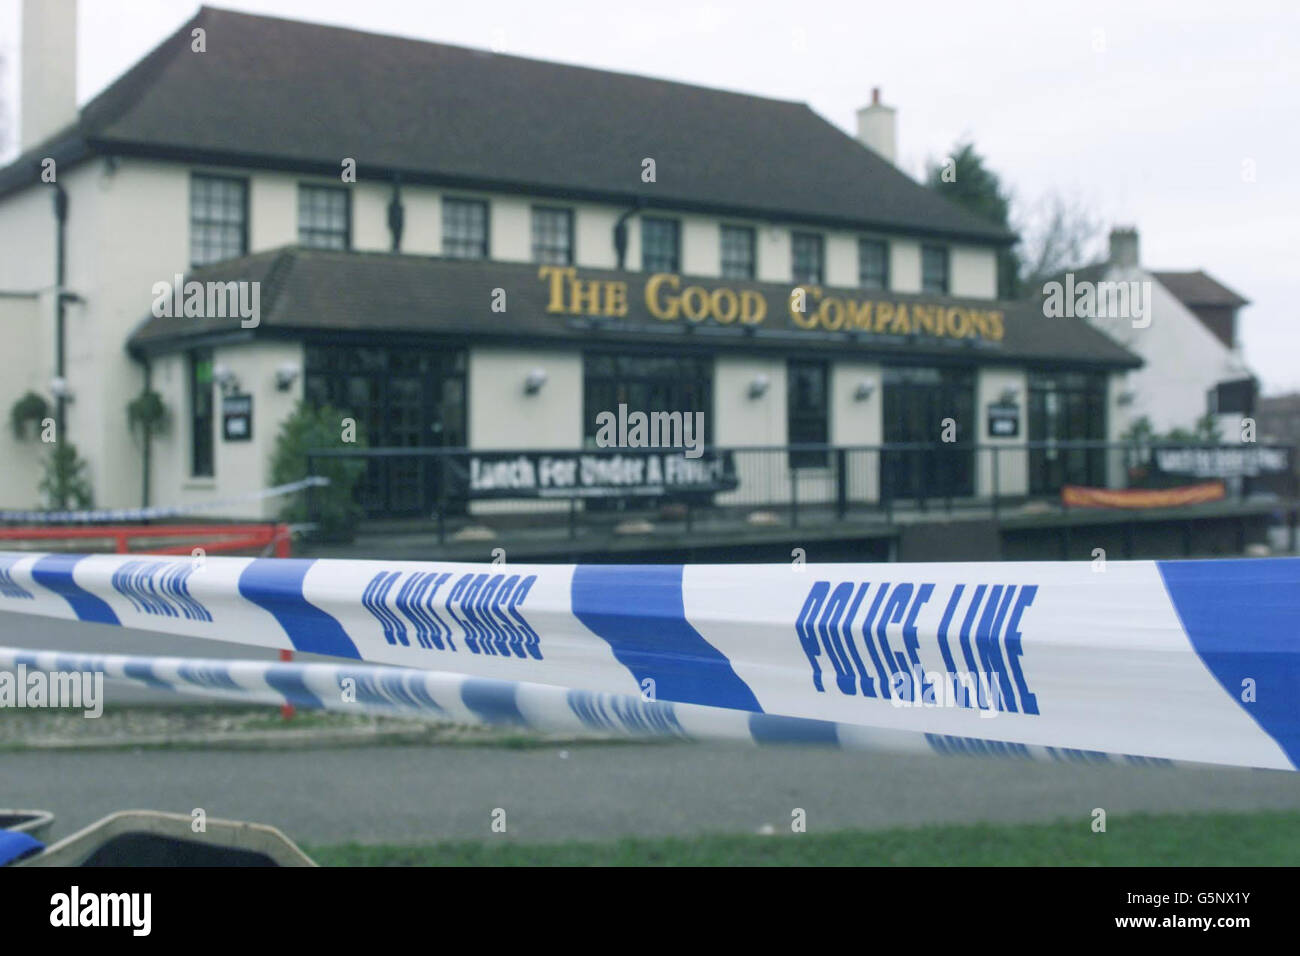 The Good Companions pub in Hamsey Green, South Croydon. Two men died after suffering gunshot wounds while a third man sustained stab wounds during a fight at the pub. * The attack followed an altercation earlier in the day between two groups of men at the White Lion pub in Warlingham, Surrey. The identities of the victims will not be revealed until the next of kin are informed. Stock Photo